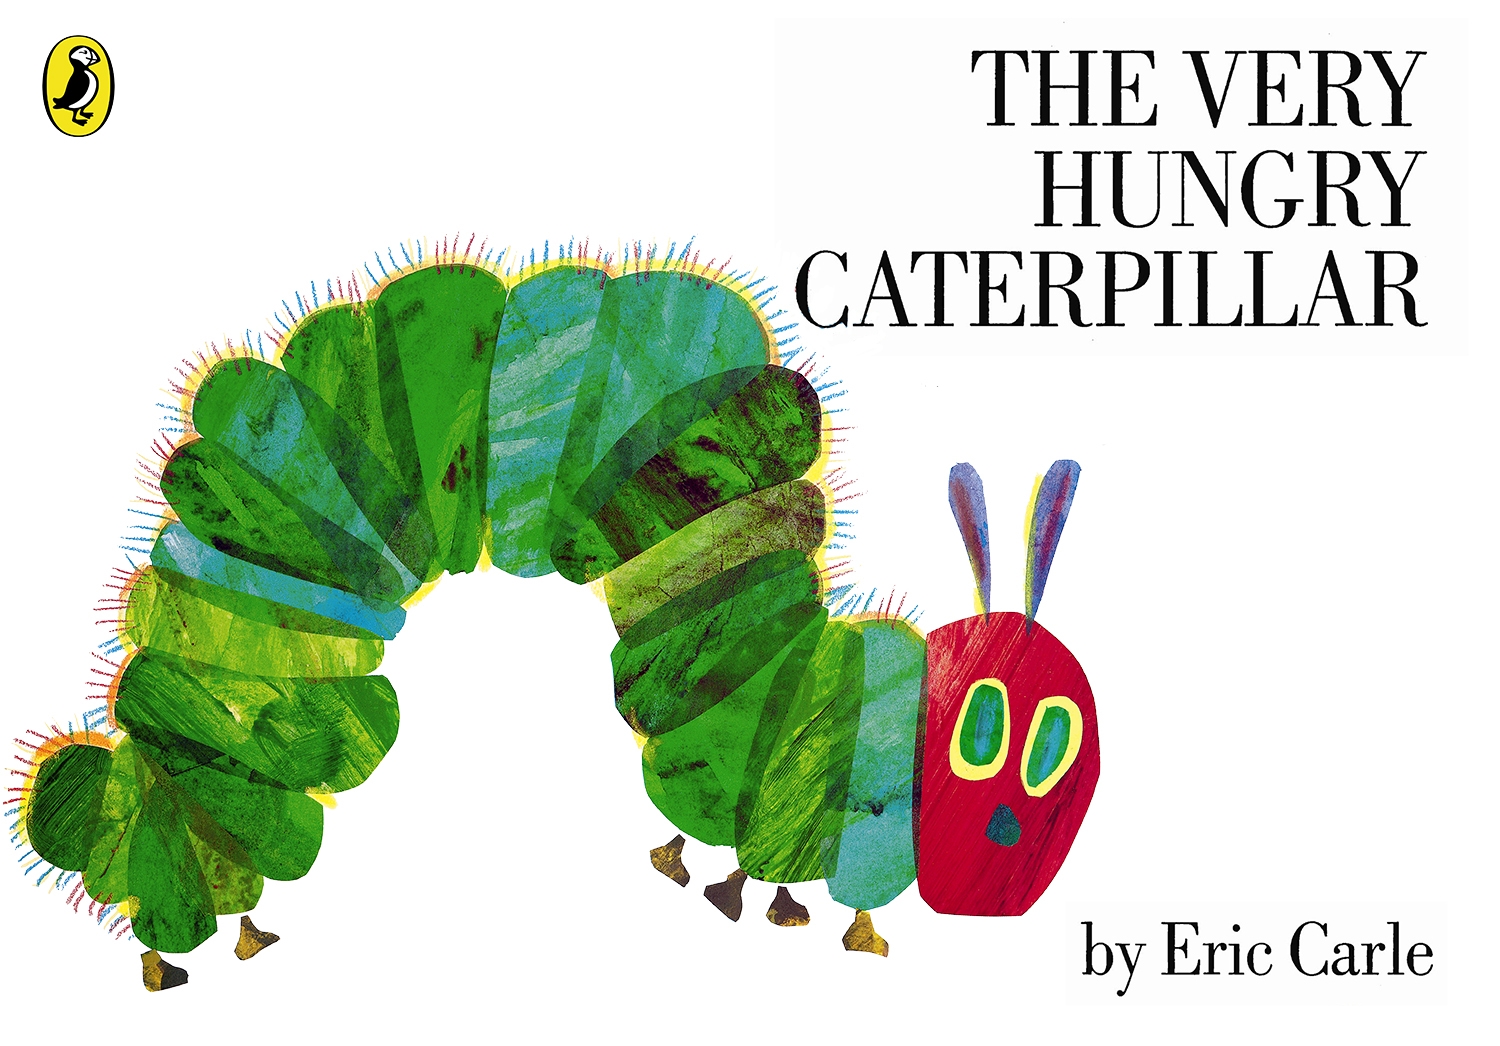 The Very Hungry Caterpillar by Eric Carle Penguin Books New Zealand